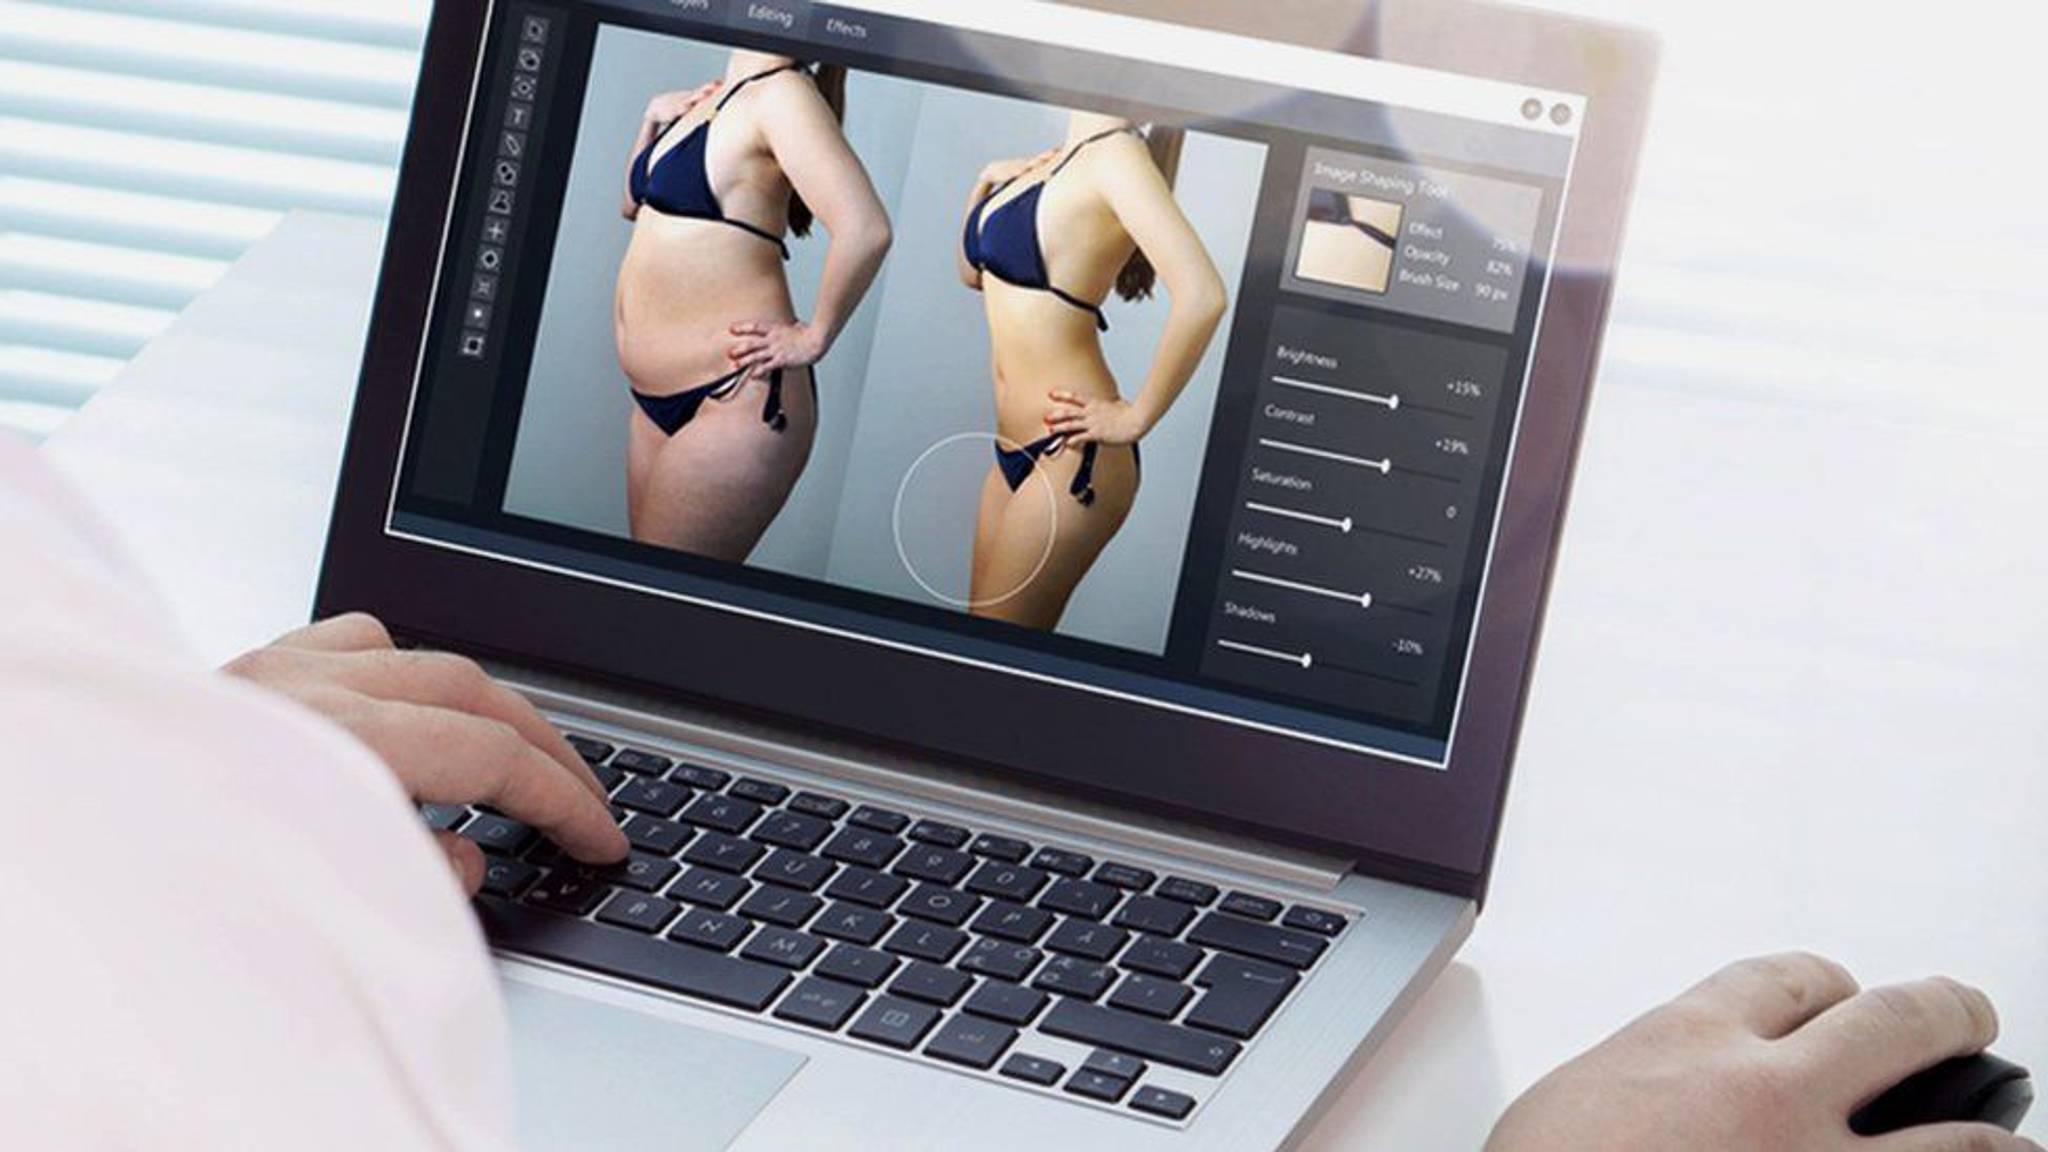 Unrealistic body standards see MP push for ad honesty